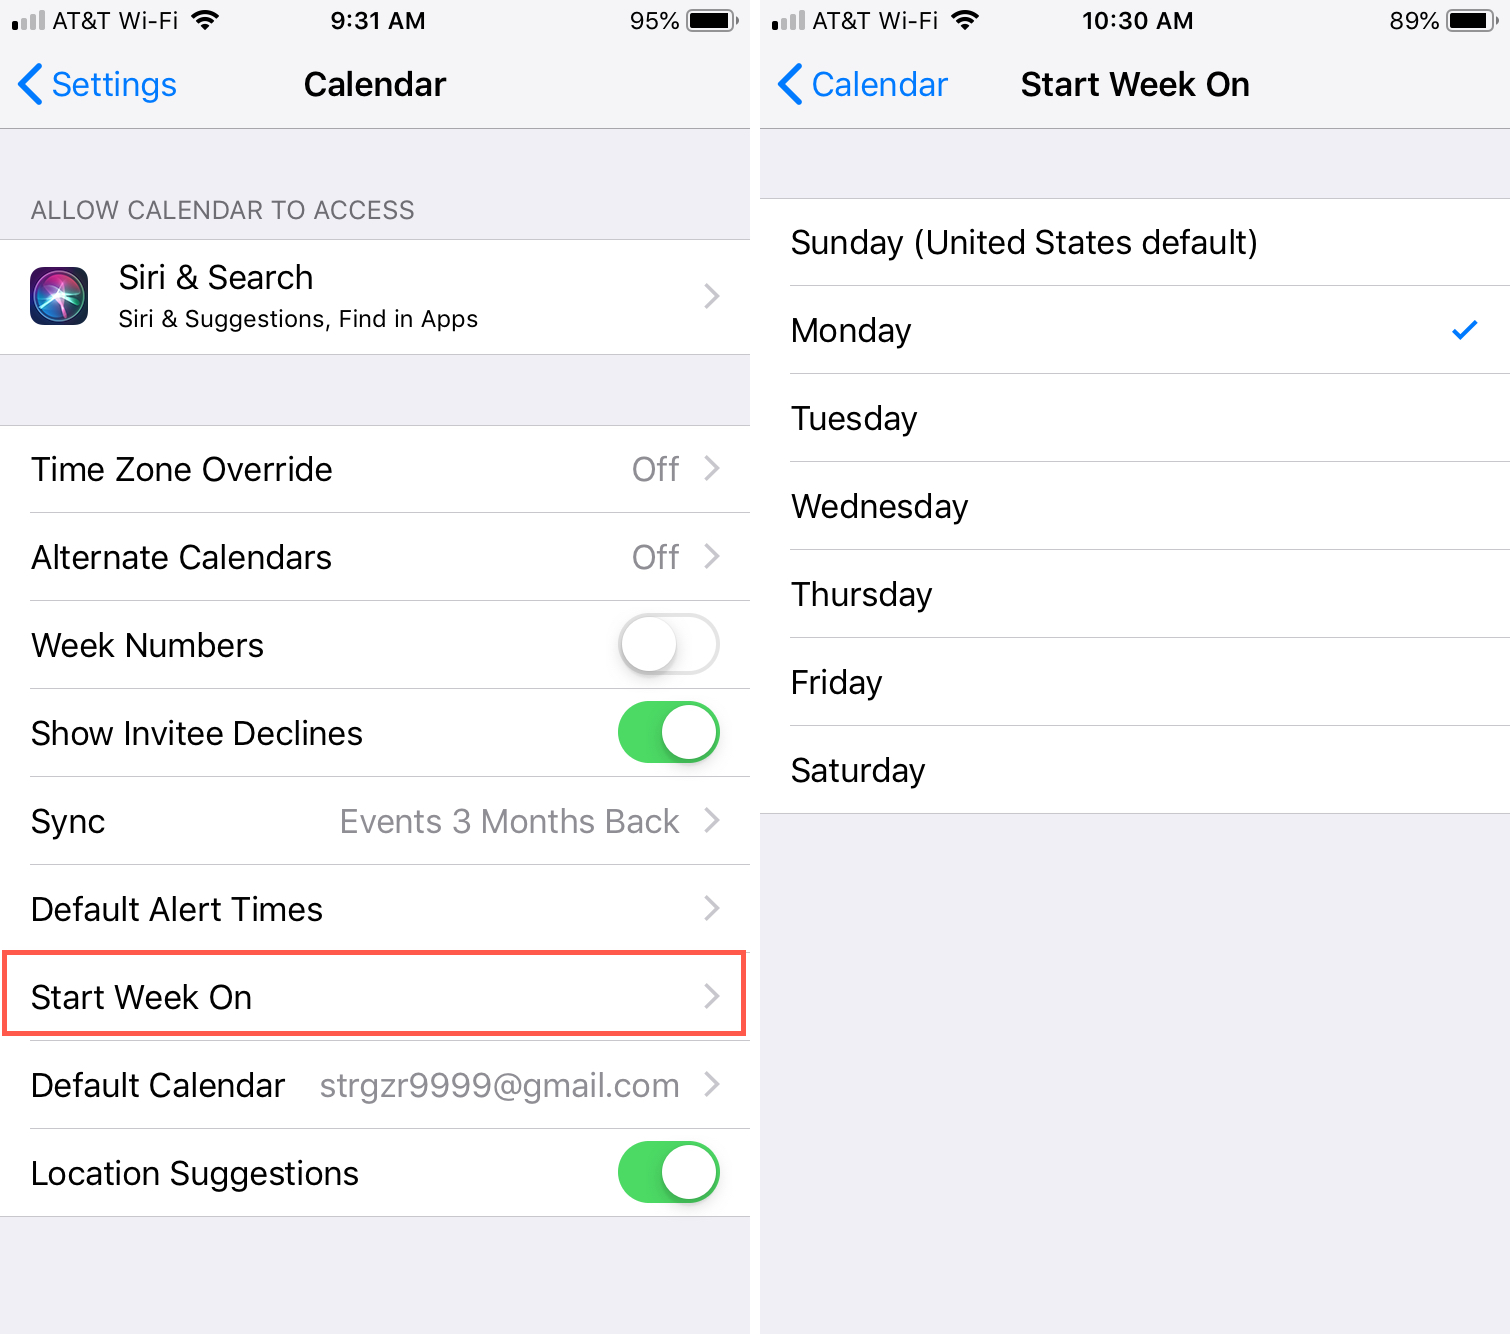 How to set the Calendar app to start on Monday instead of Sunday Mid